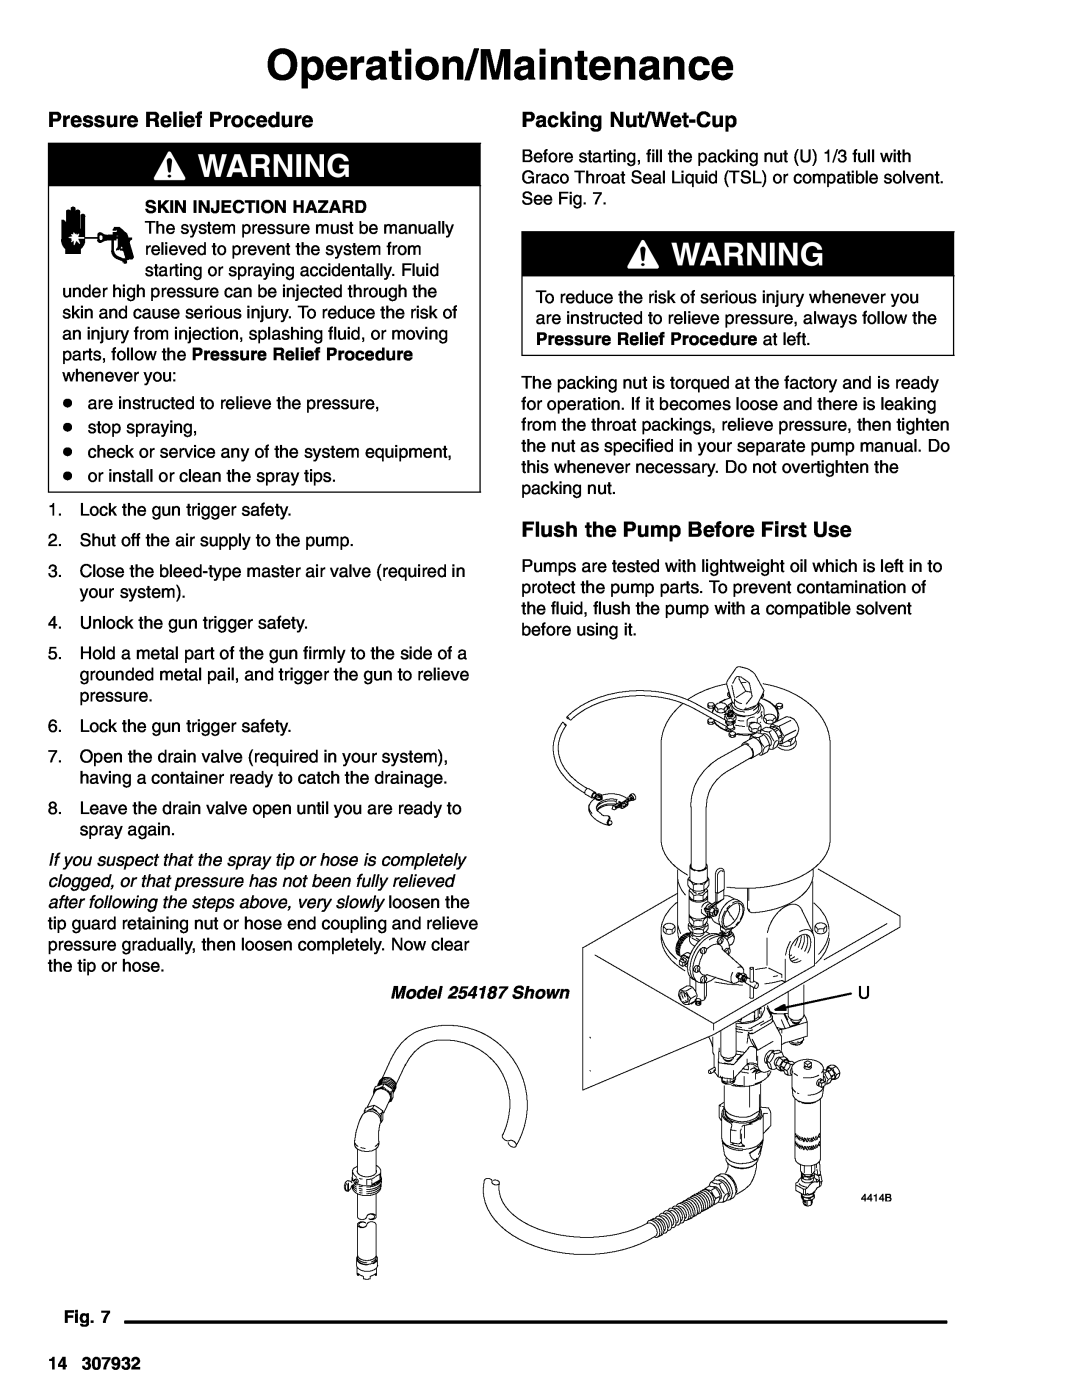 Graco 245185 Operation/Maintenance, Pressure Relief Procedure, Packing Nut/Wet-Cup, Flush the Pump Before First Use 